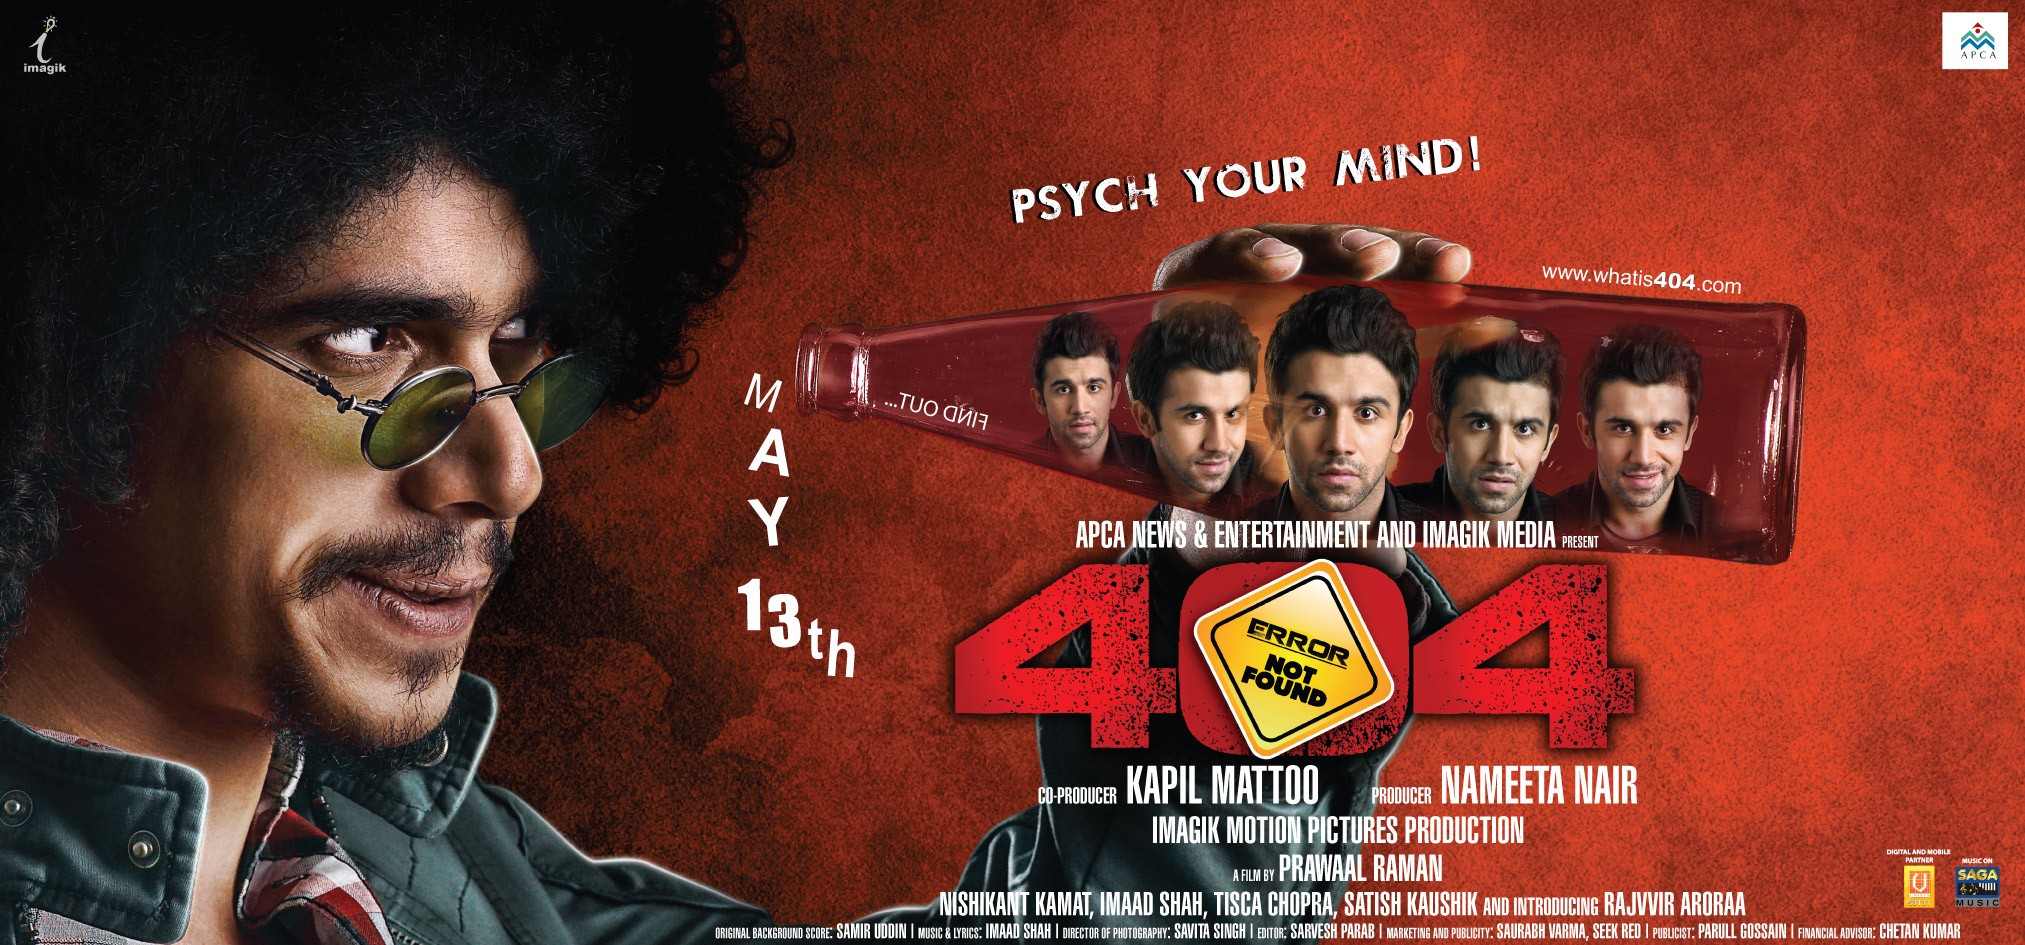 Mega Sized Movie Poster Image for 404 (#4 of 7)